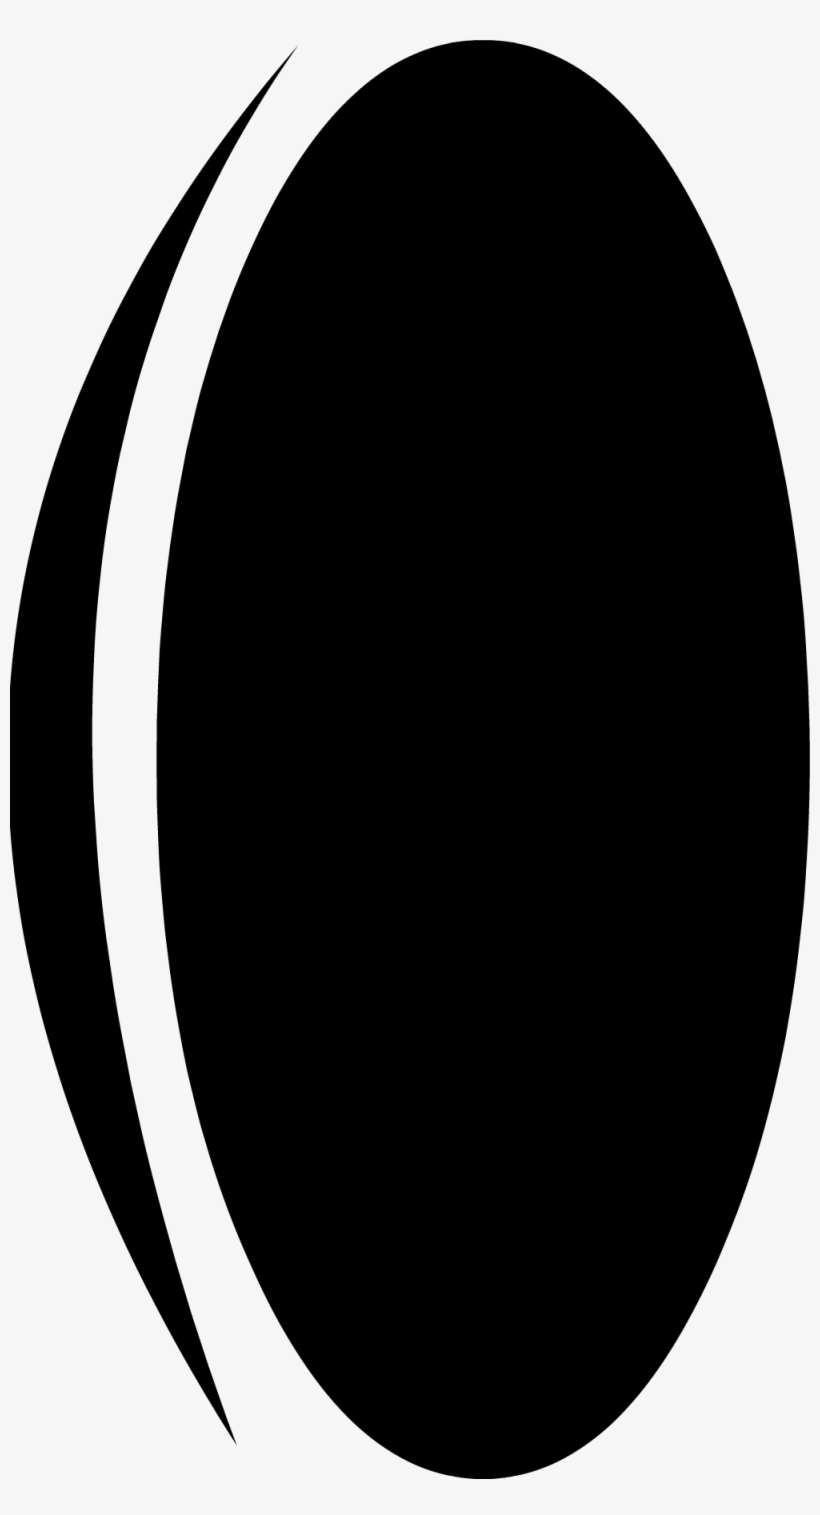 Yellow Eraser Bfdi Scared Eyes - Waning Crescent Clip Art, transparent png #4312509